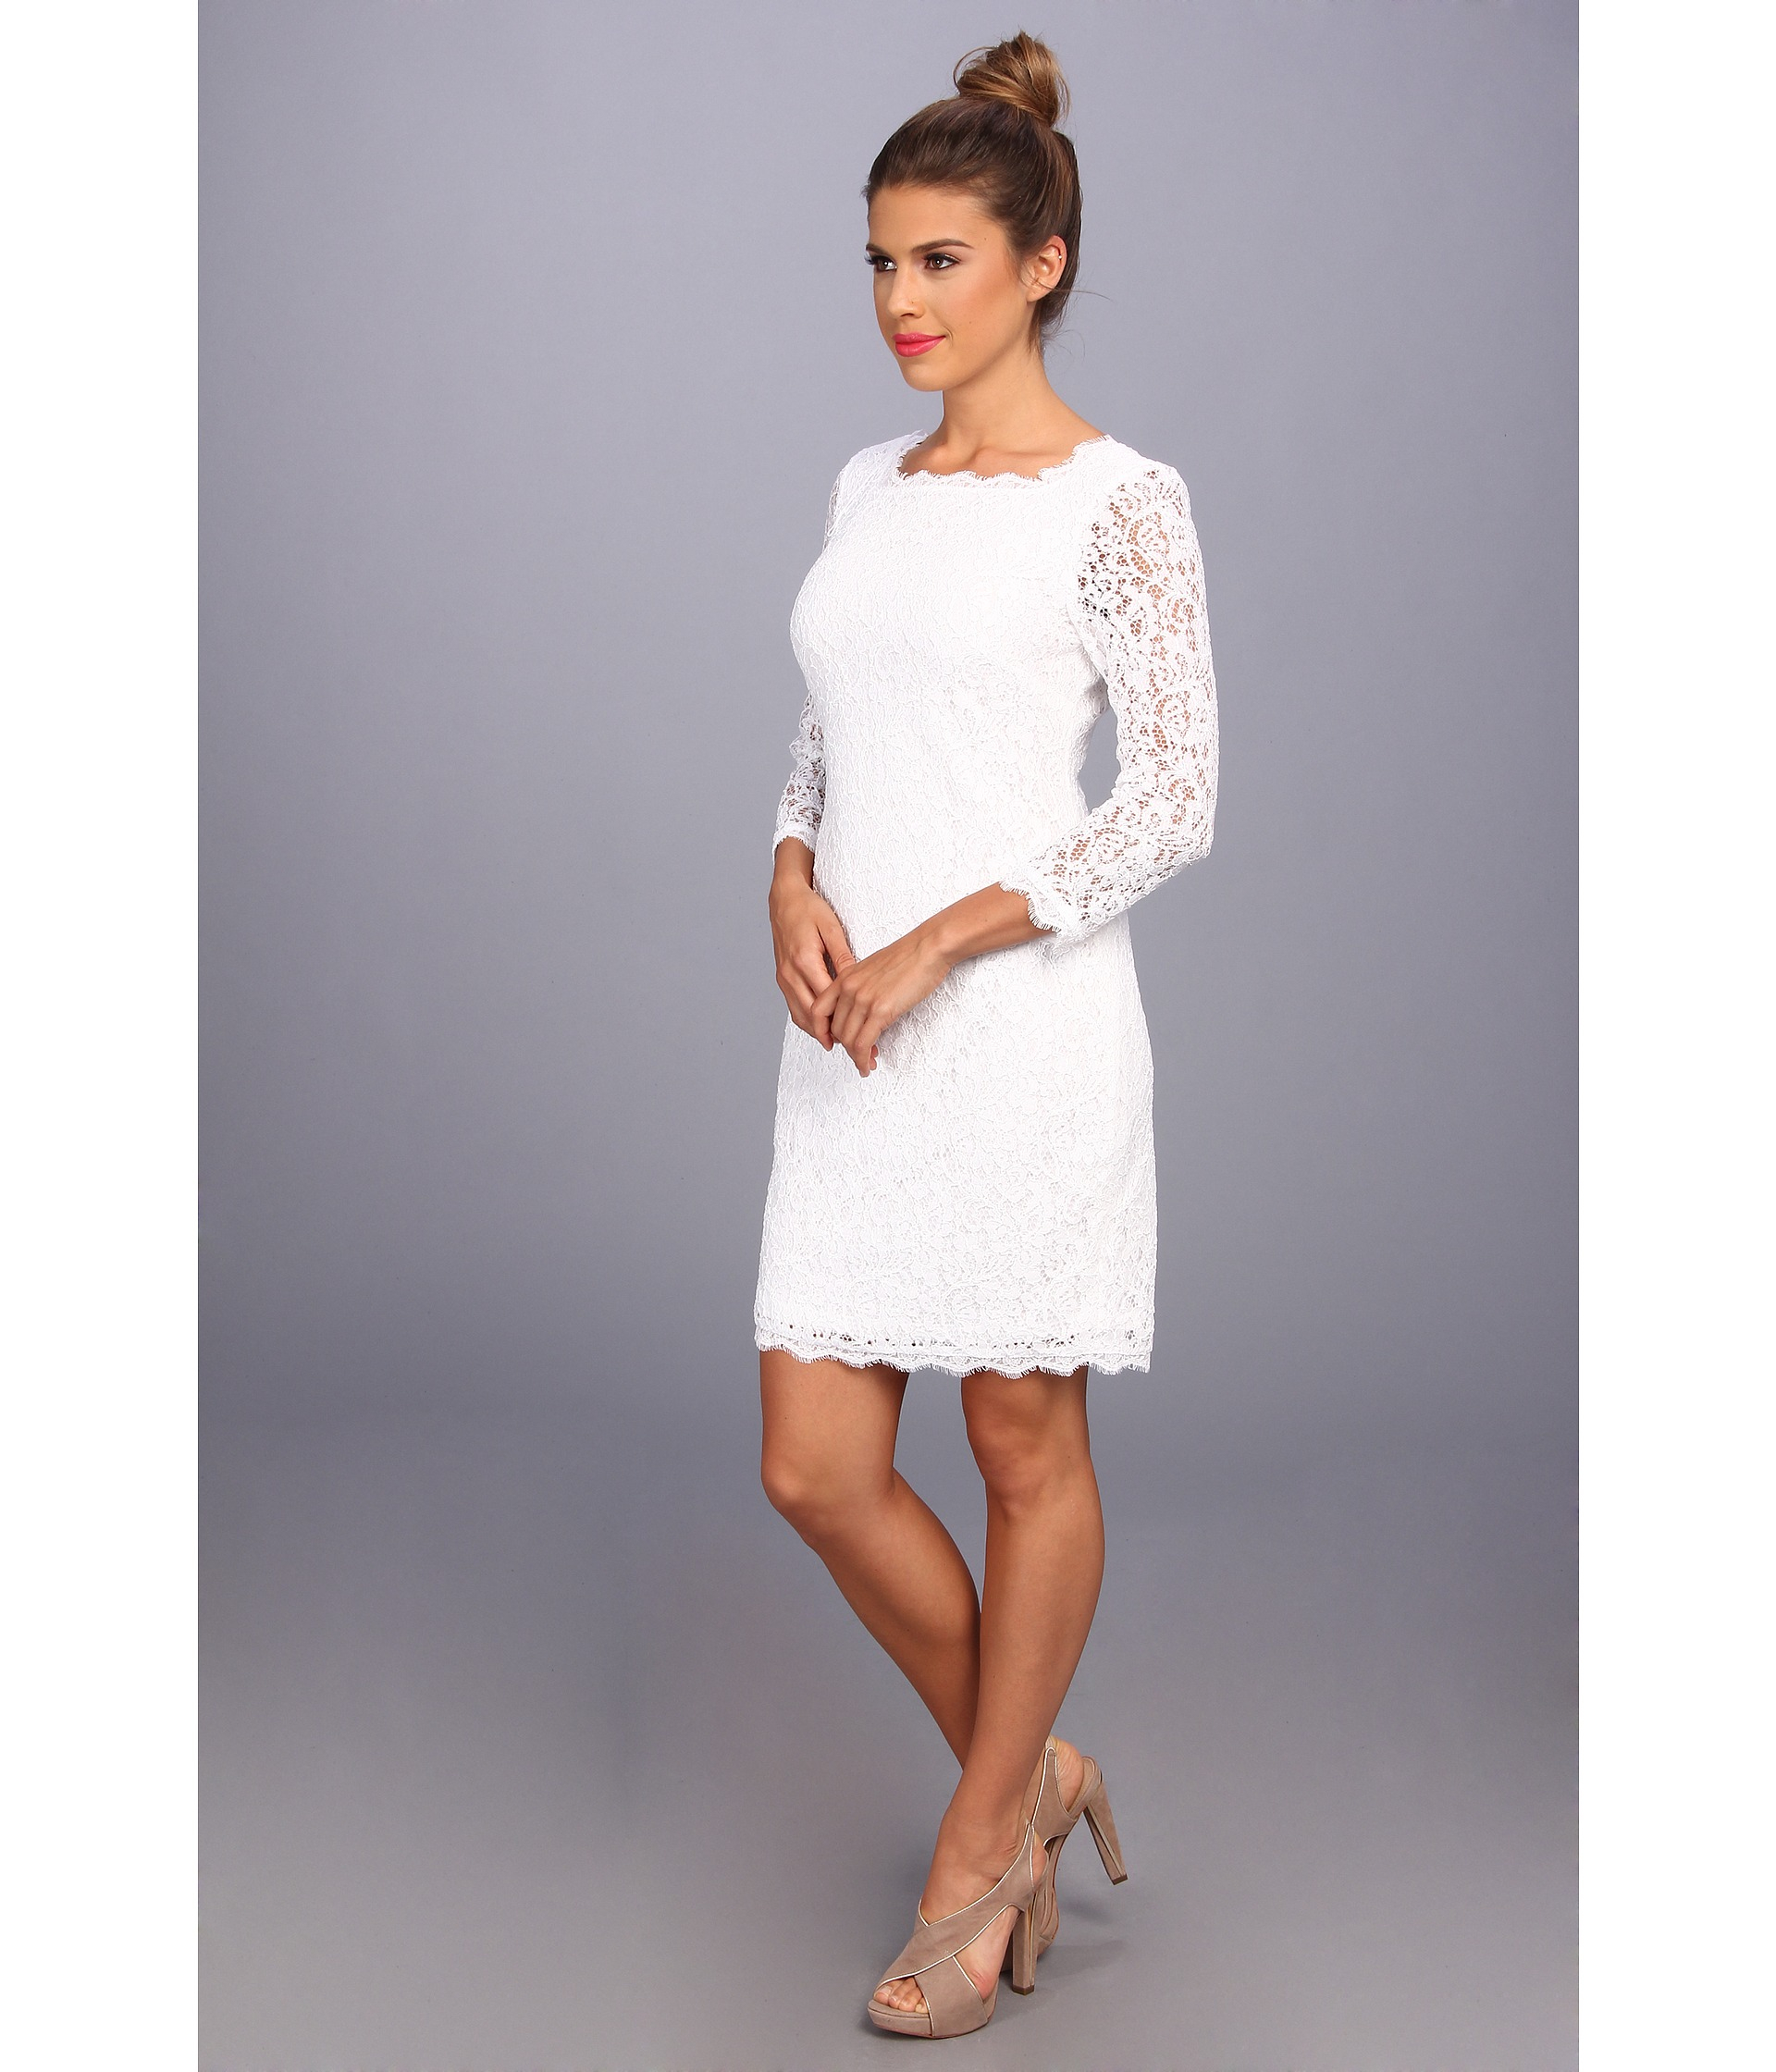 Adrianna Papell 3/4 Sleeve Lace Dress in White | Lyst